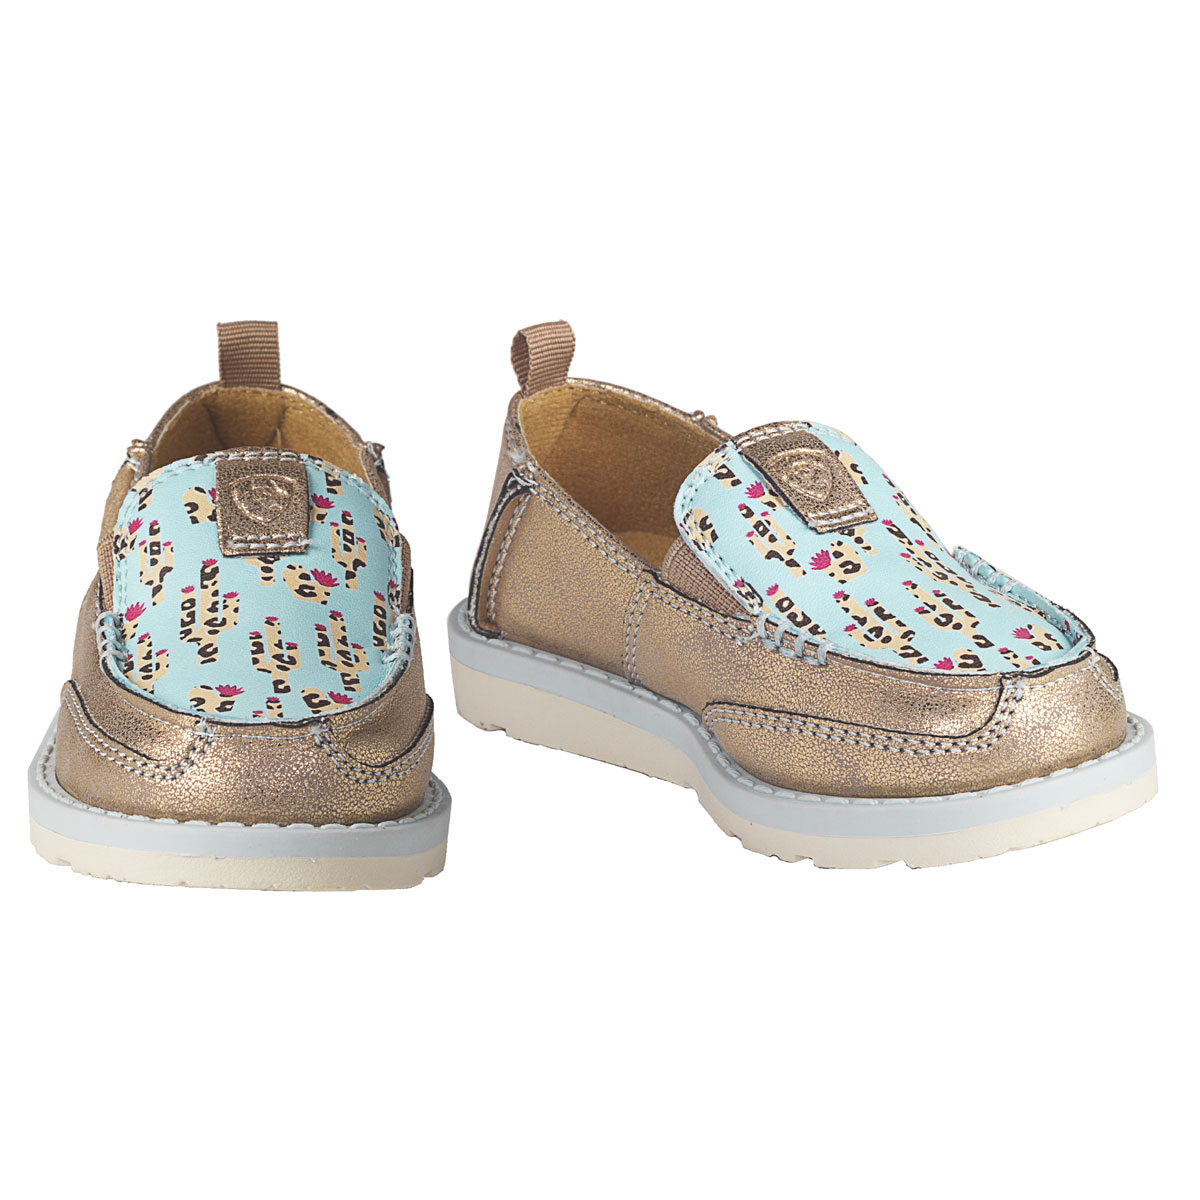 Ariat Girl's Cruiser Piper Casual Shoes - Turquoise